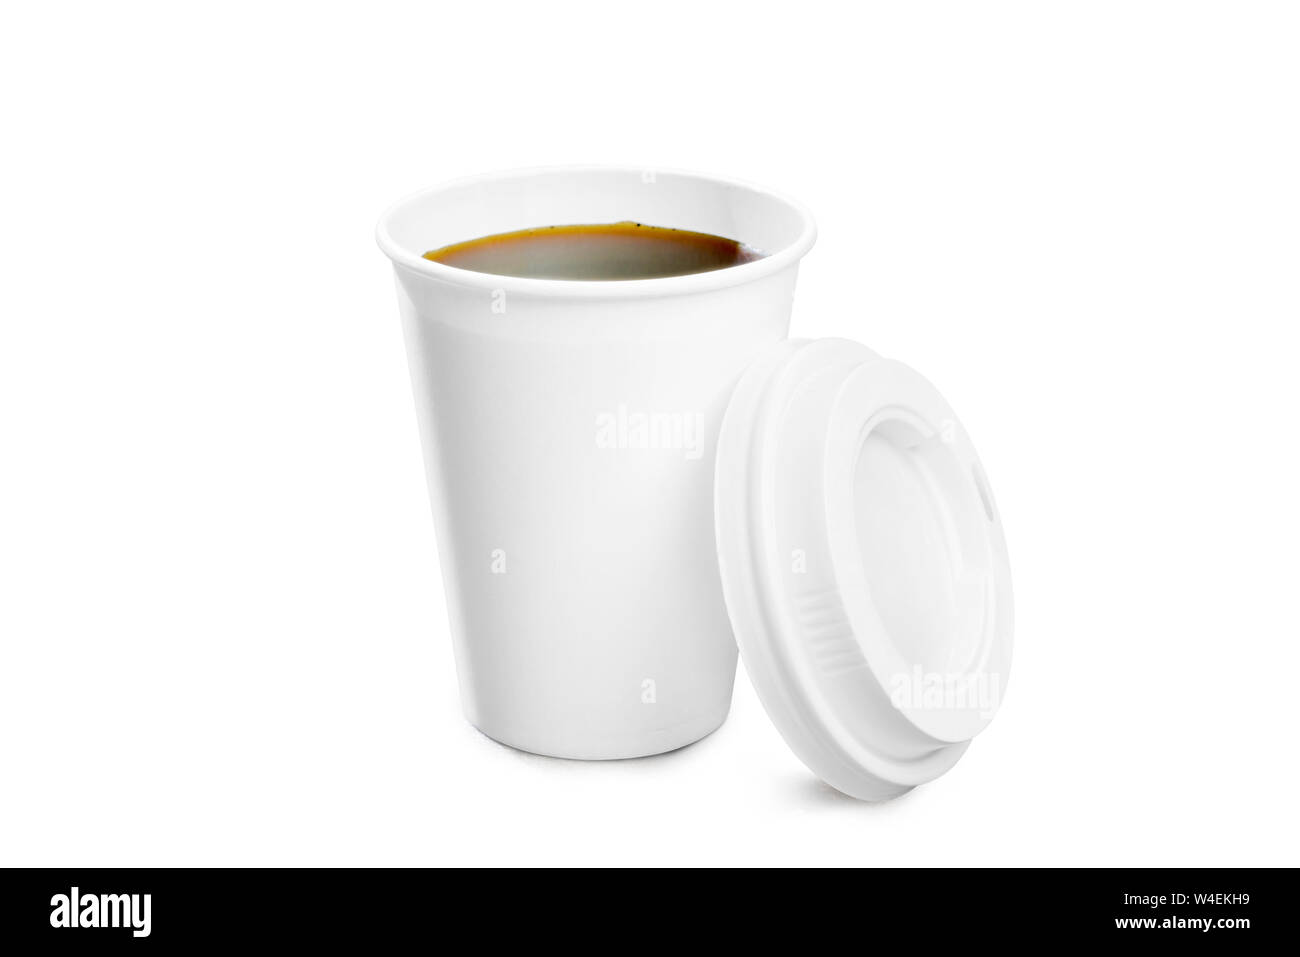 Download Styrofoam Cup High Resolution Stock Photography And Images Alamy Yellowimages Mockups